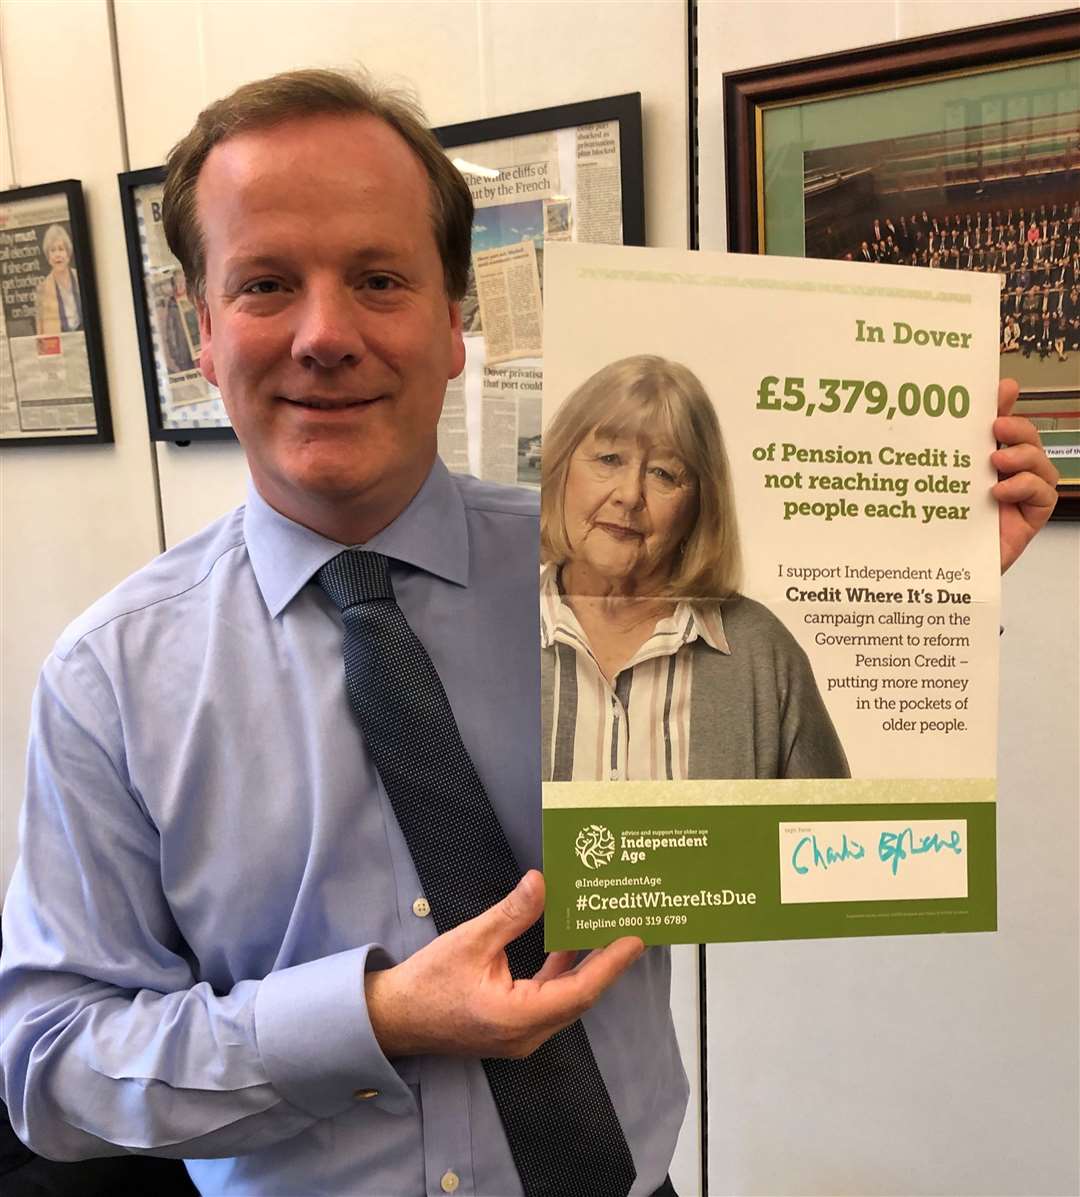 Mr Elphicke supports Independent Age campaign on Pension Credit. Picture: the office of Charlie Elphicke MP